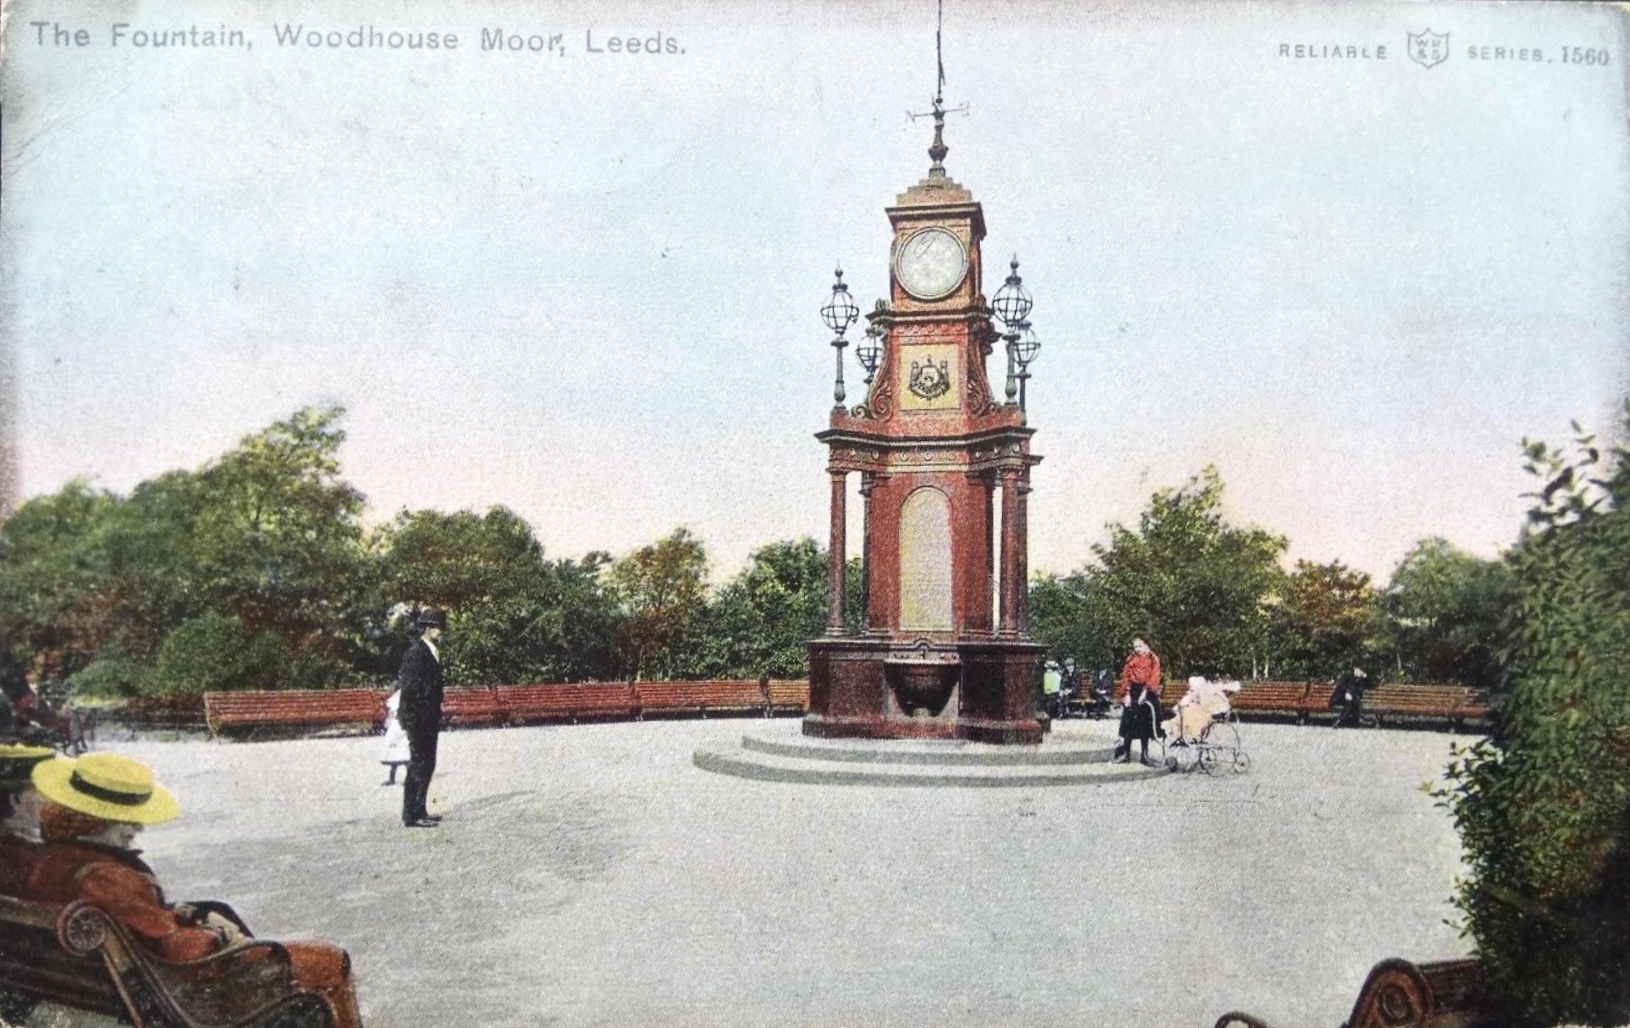 Cast Iron and Stone Drinking Fountain, early 1900s